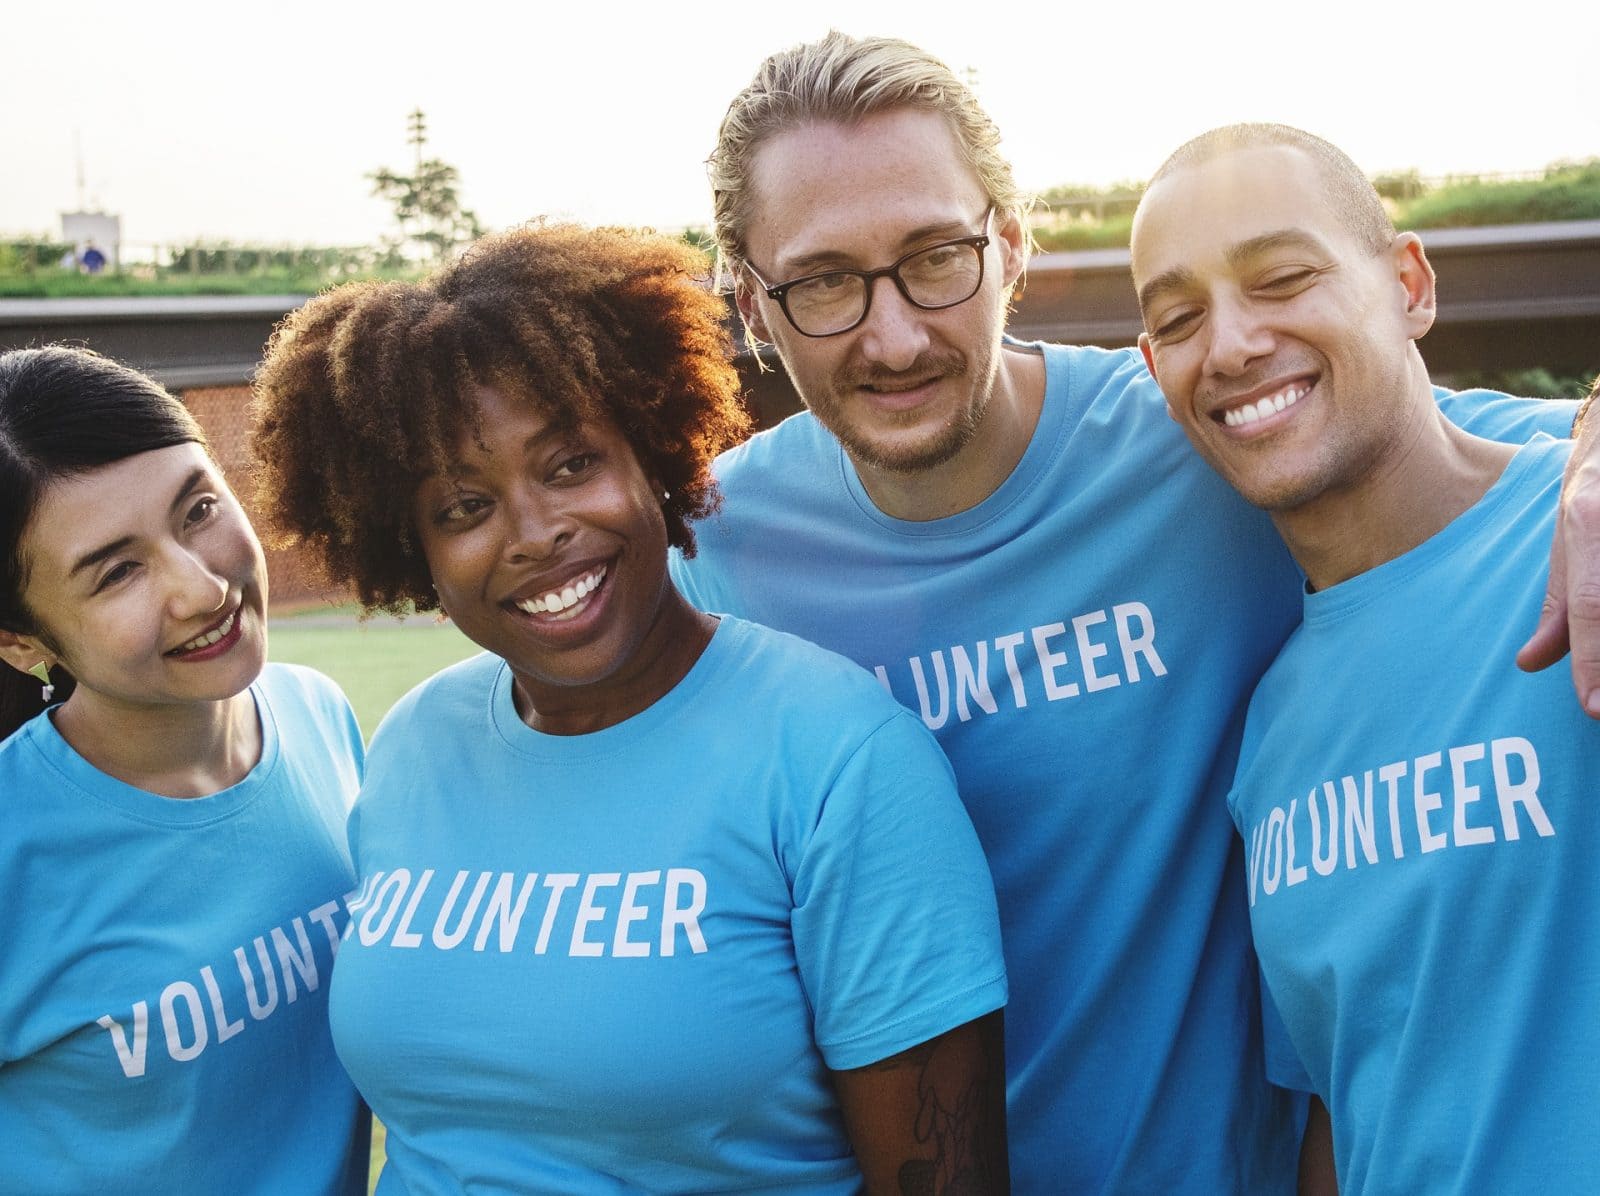 Two men and two women wearing volunteer's t shirts smiling